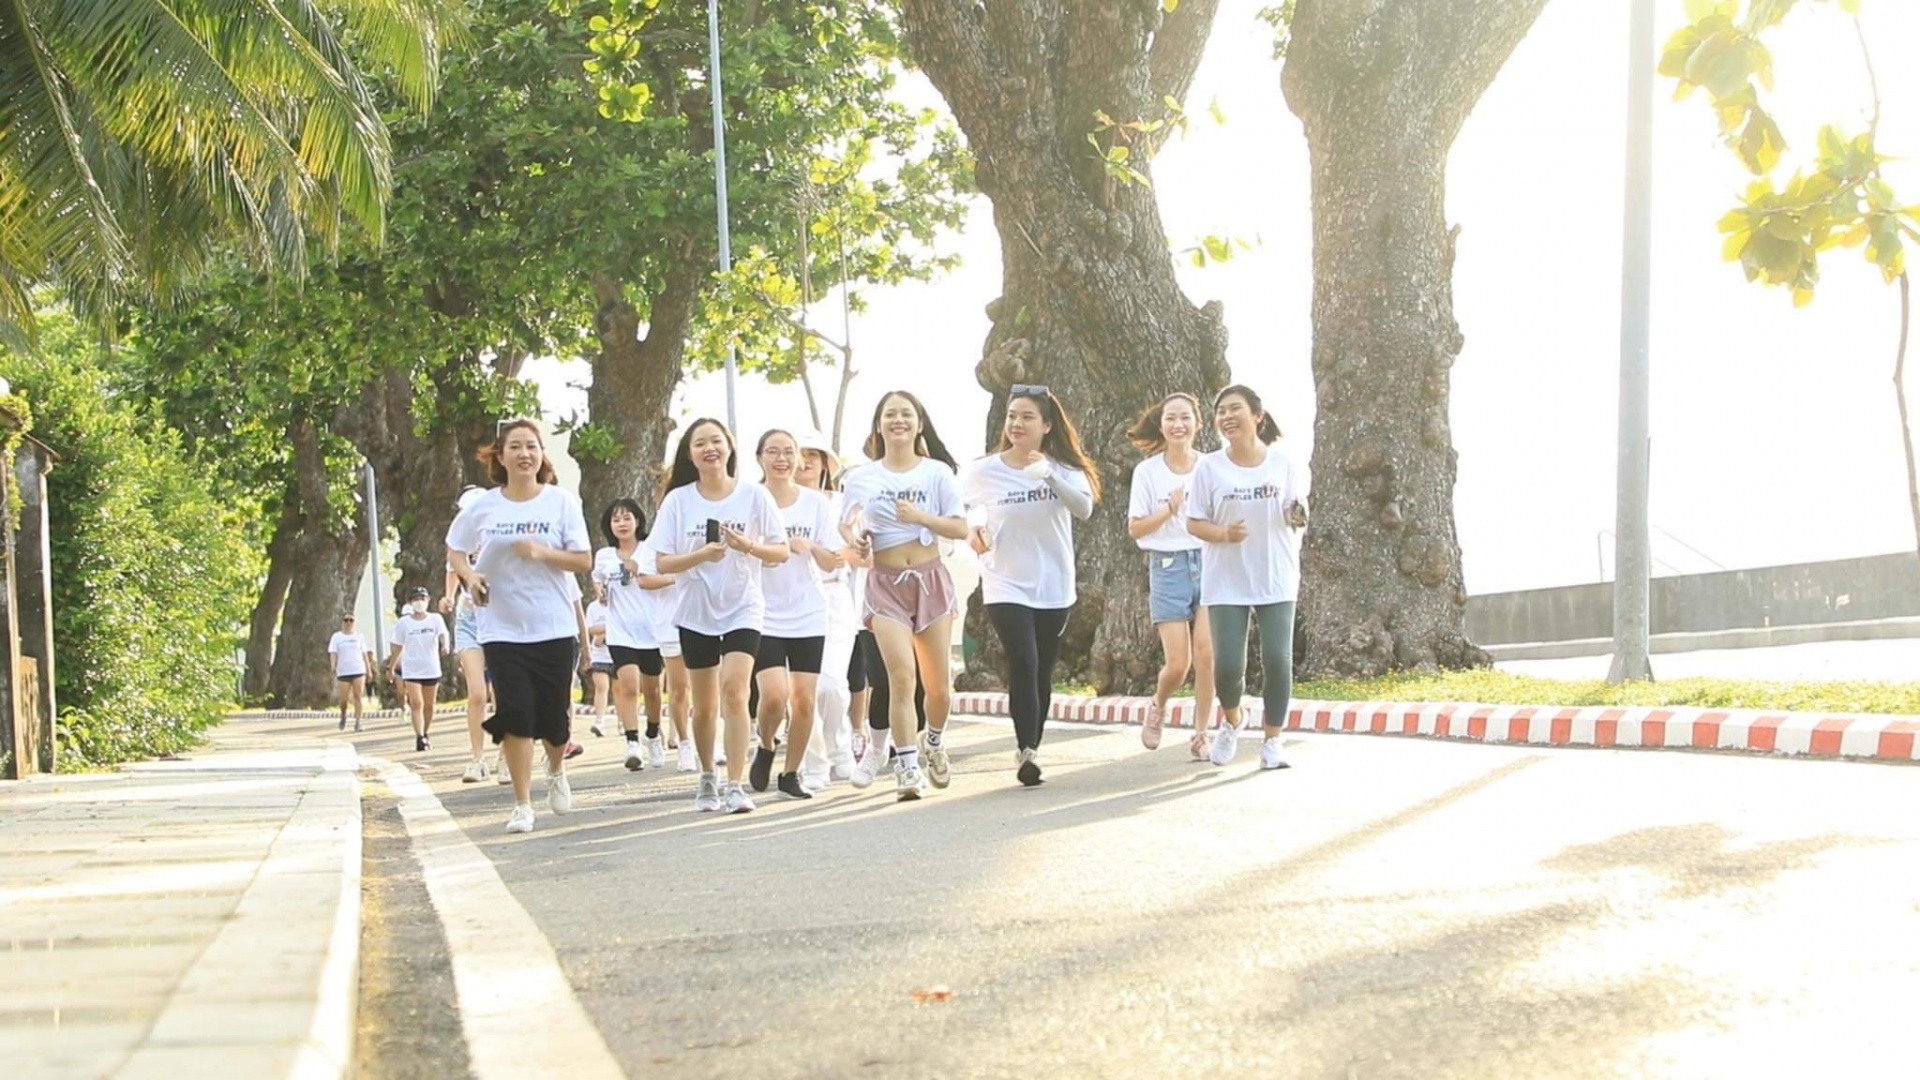 “Save Turtles Run“ by The Secret Con Dao promotes awareness of turtles conservation